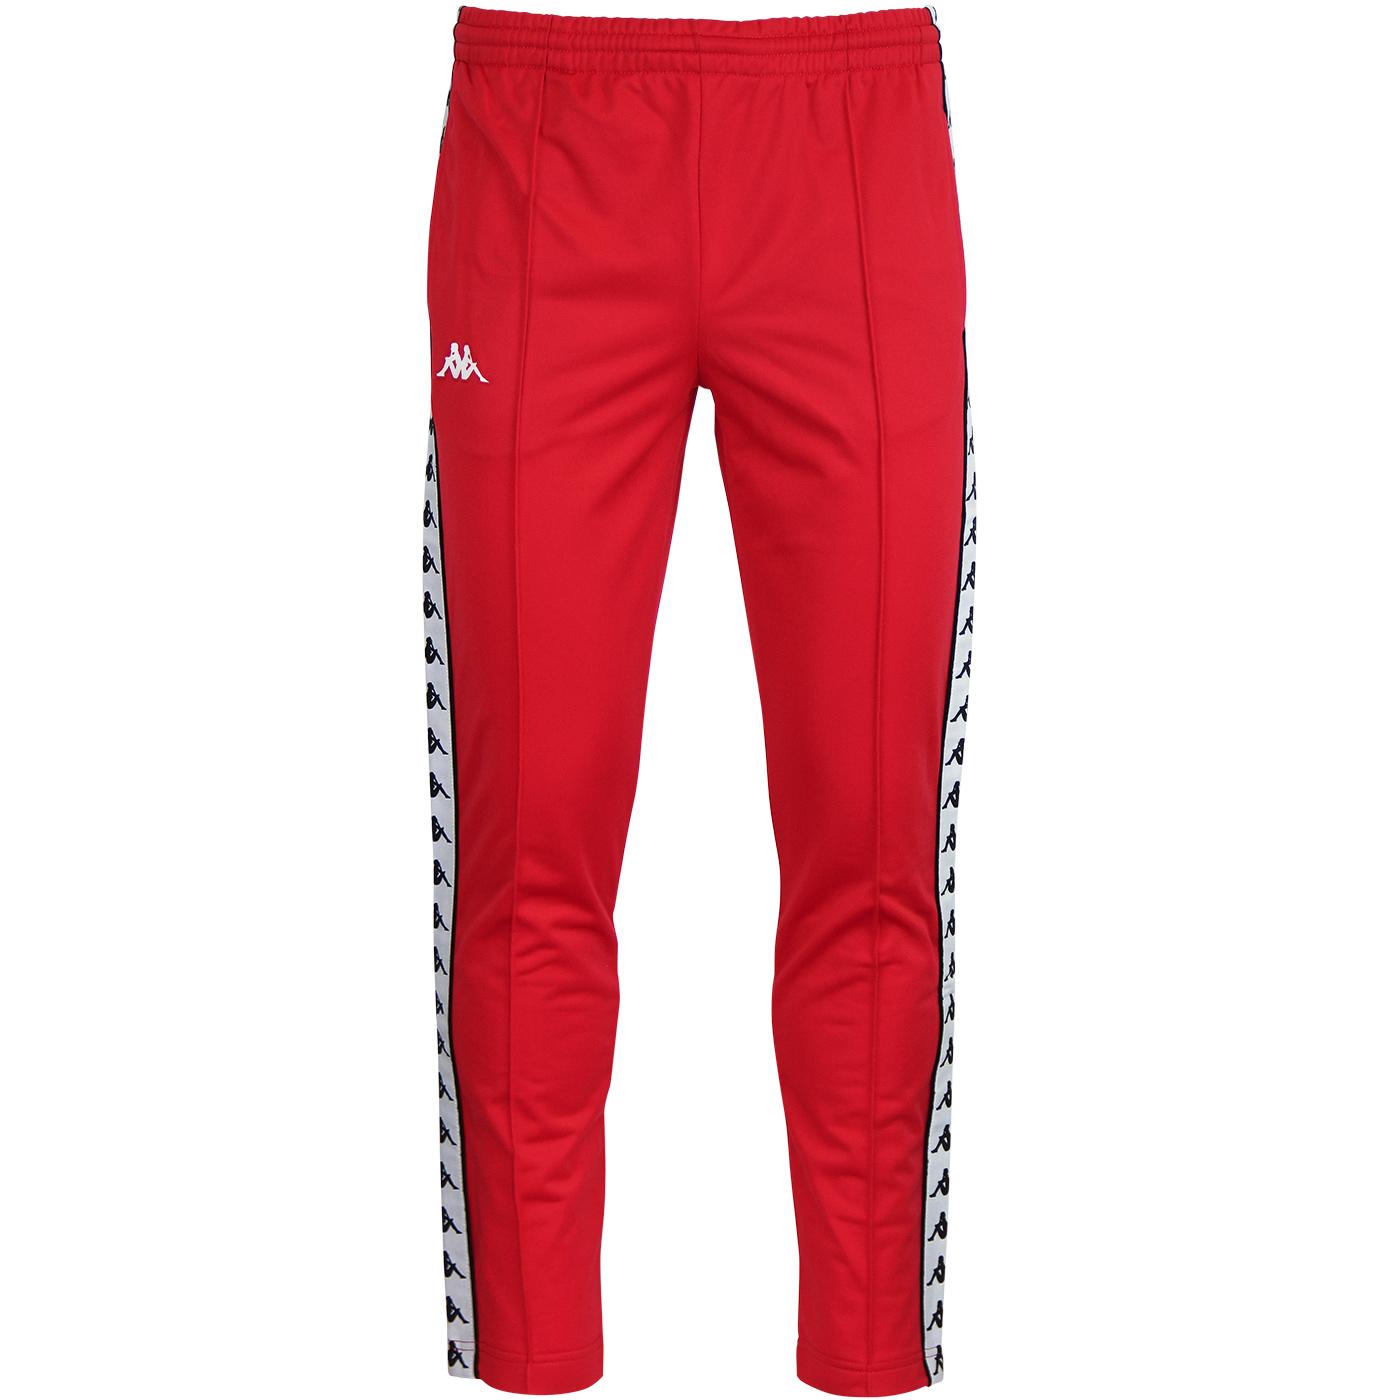 red and white kappa tracksuit